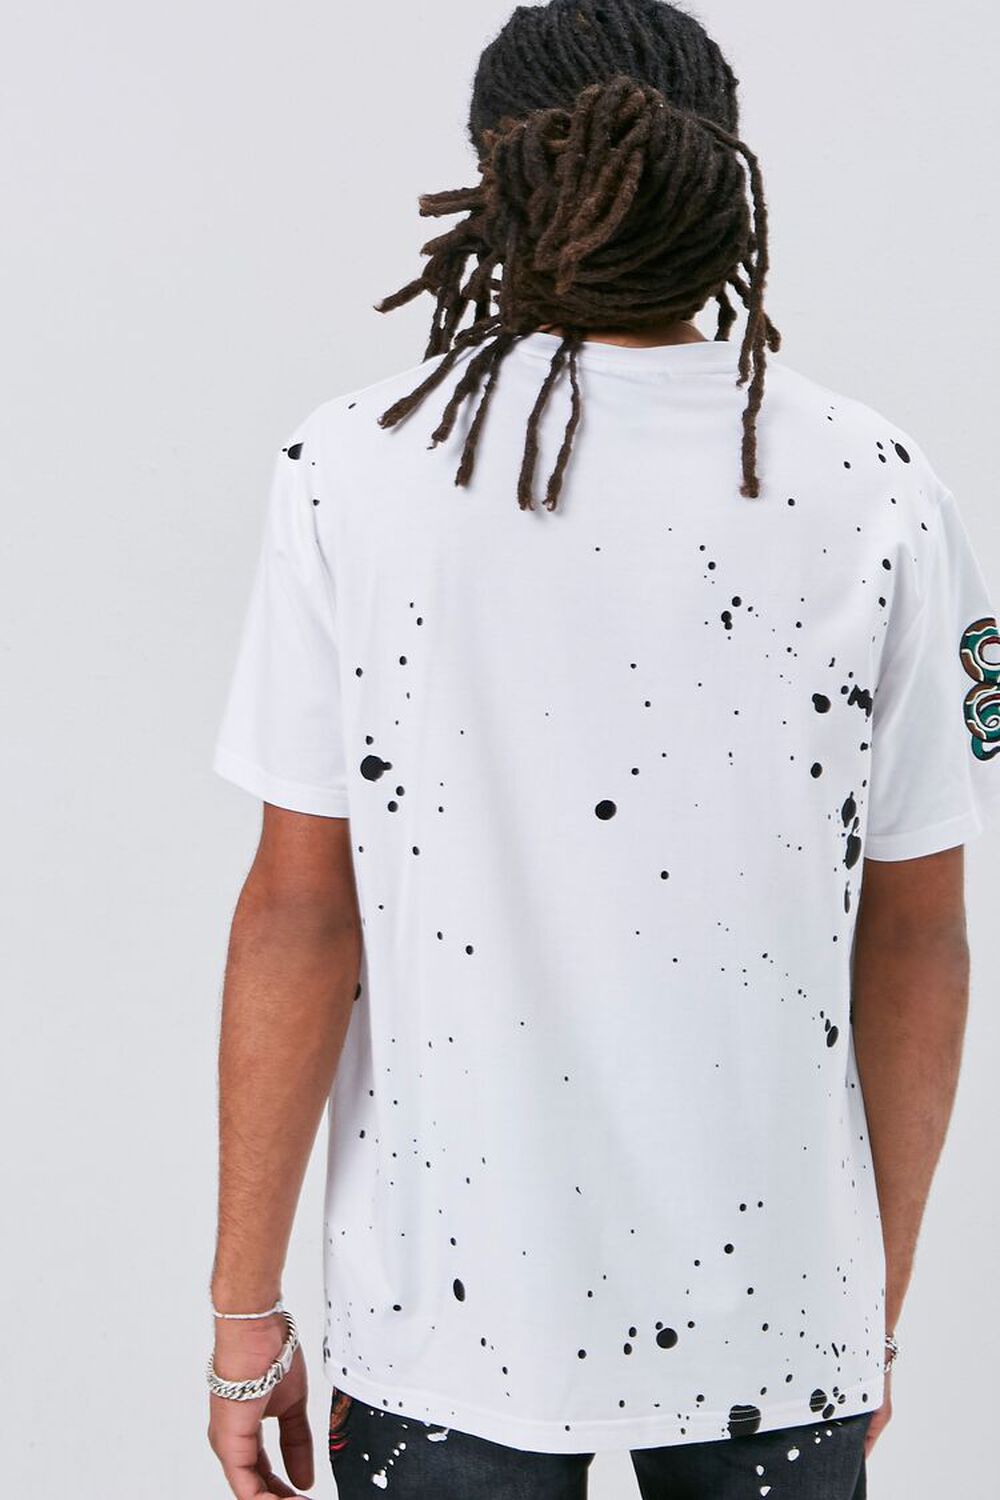 WHITE/MULTI Embroidered Graphic Paint Splatter Tee, image 3